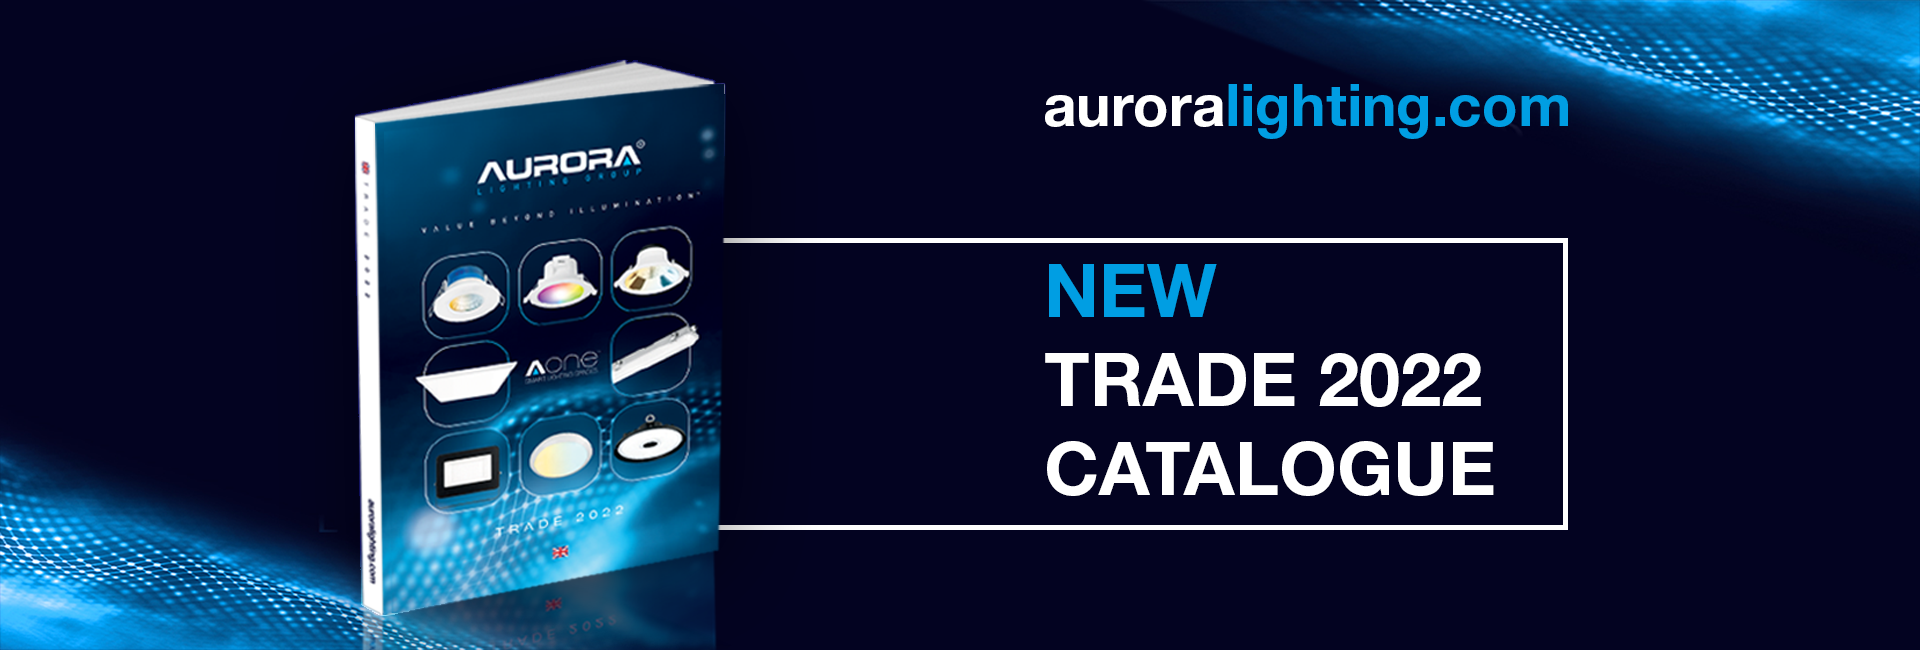 Show products in category Aurora Lighting Launches Trade 2022 Catalogue